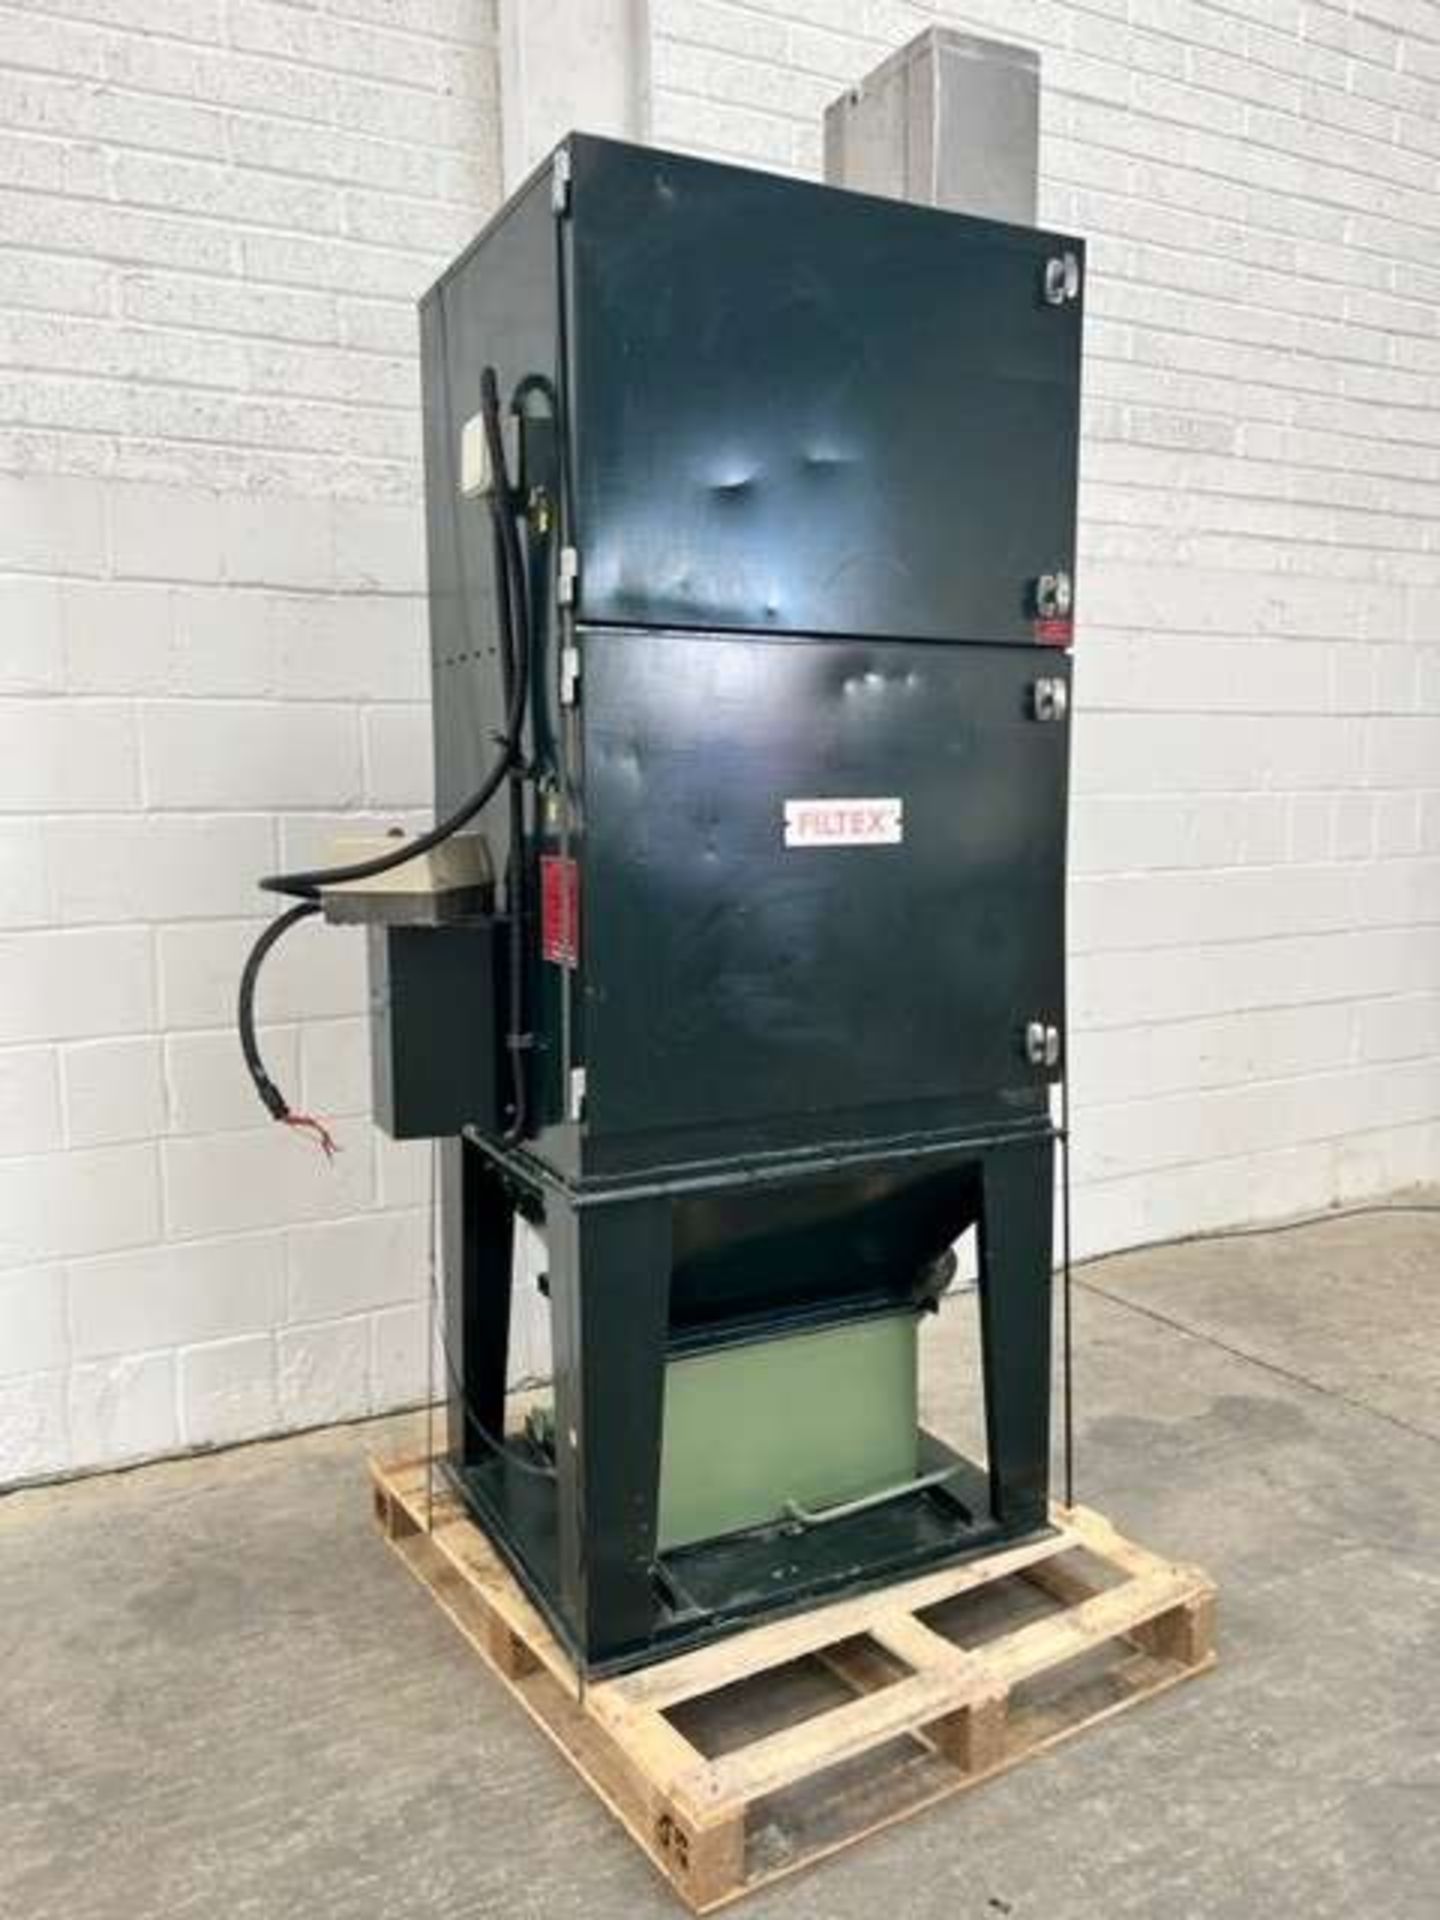 Filtex Dust Collector and Extraction Unit - Image 2 of 6